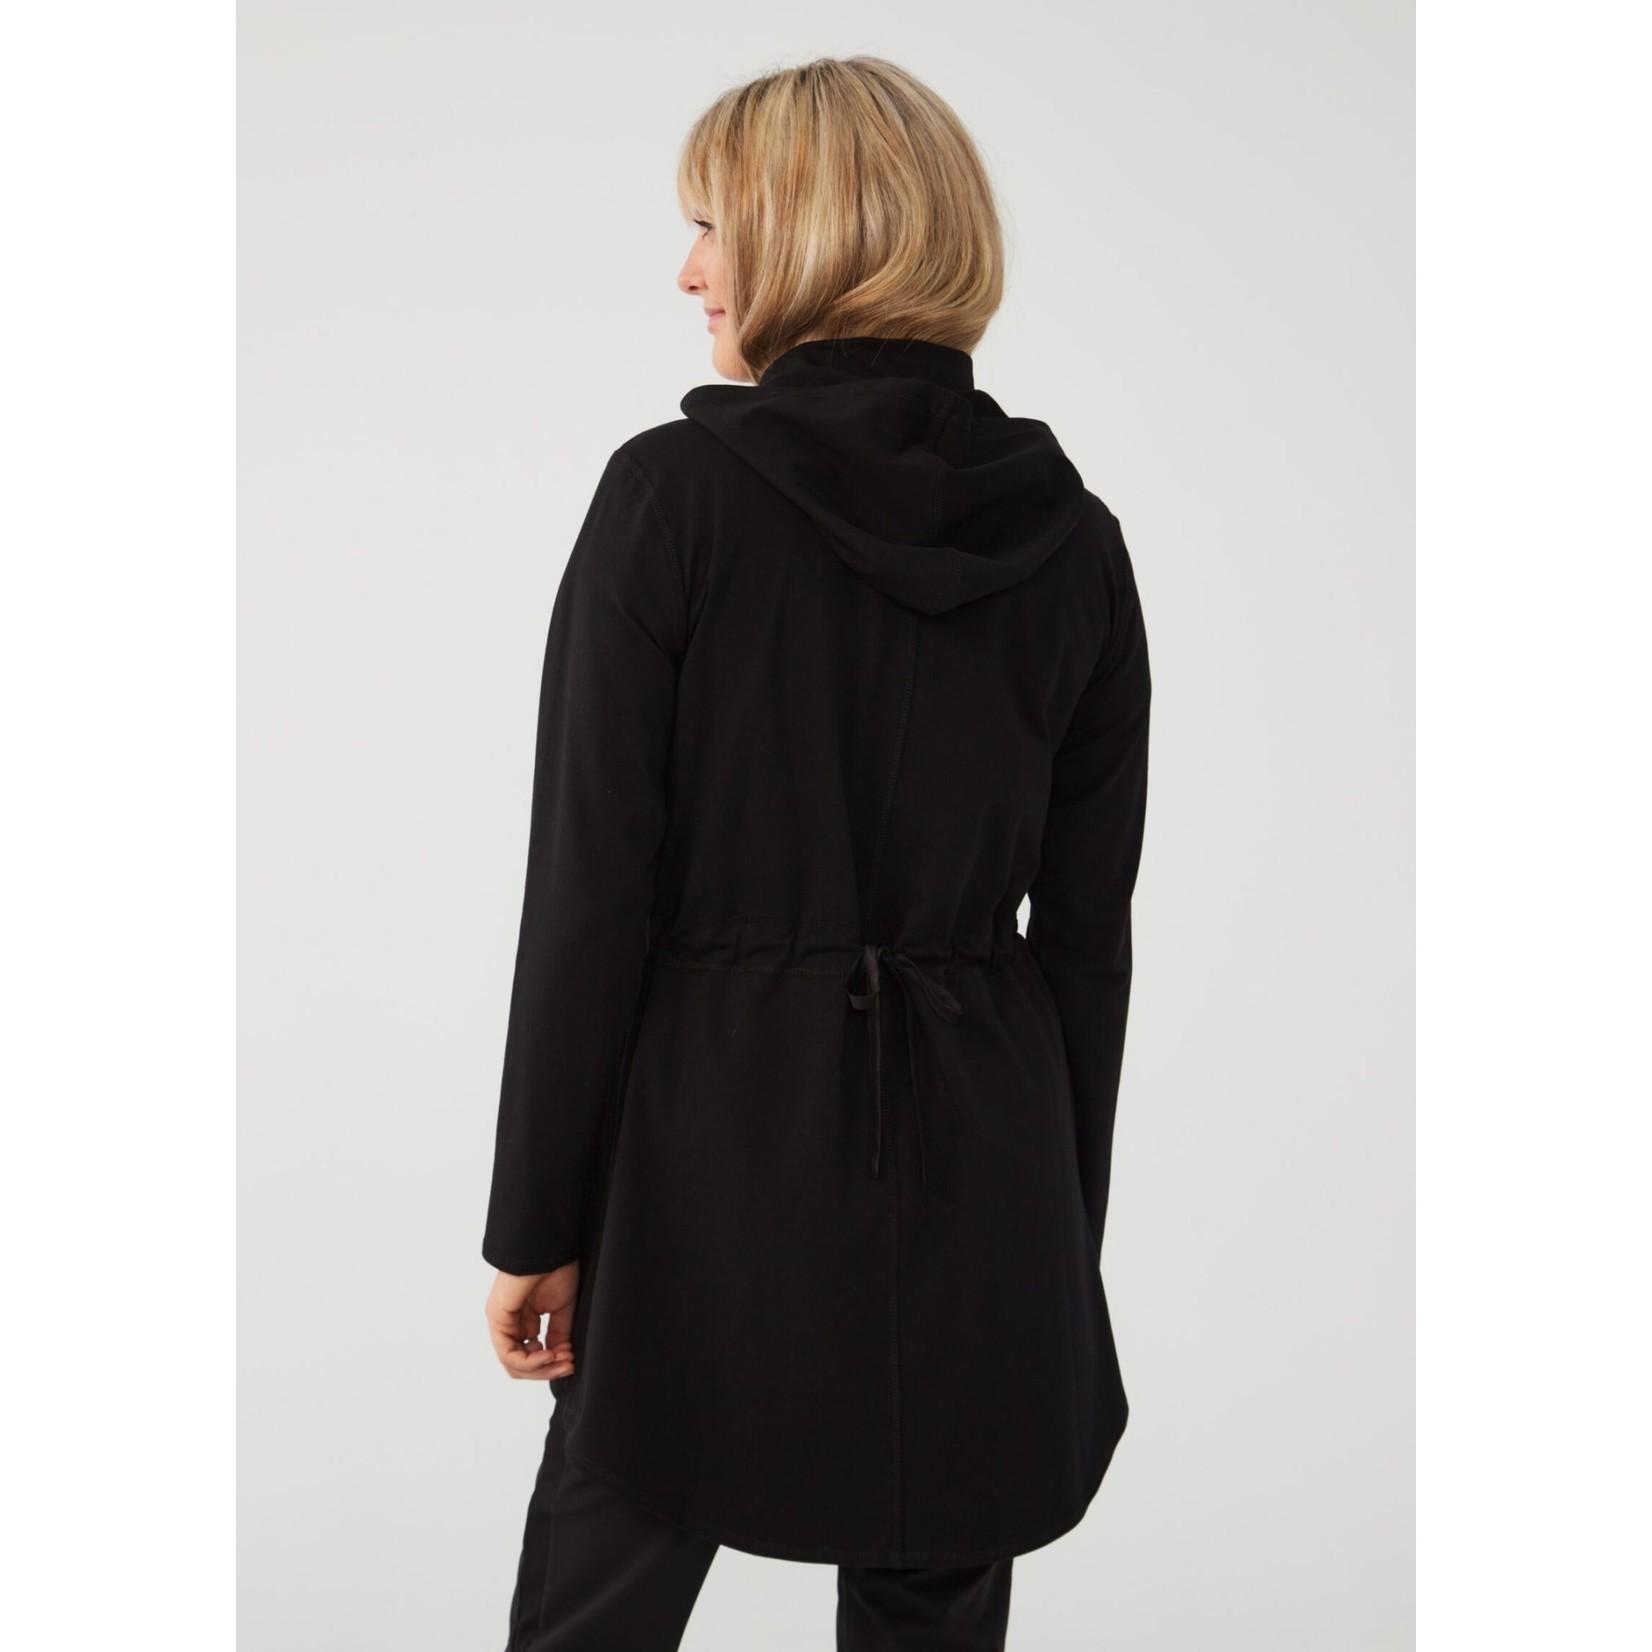 FDJ Button-Up Hooded Jacket in Black